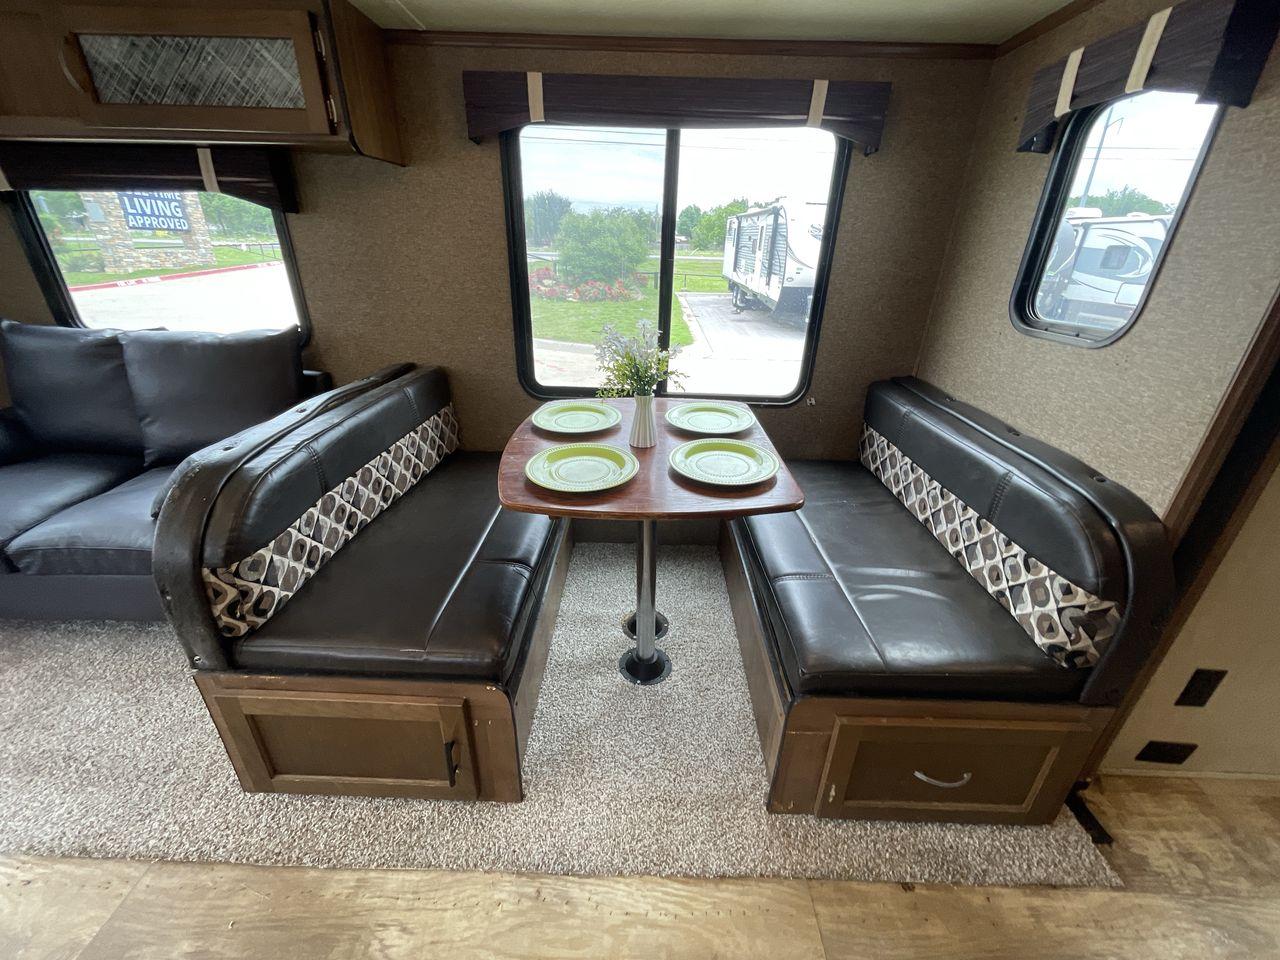 2018 GULFSTREAM TRAILMASTER 262RLS (1NL1GTP2XJ1) , Length: 31.25 ft. | Dry Weight: 6,849 lbs. | Slides: 1 transmission, located at 4319 N Main St, Cleburne, TX, 76033, (817) 678-5133, 32.385960, -97.391212 - This 2018 Gulf Stream Trailmaster 262RLS travel trailer measures just over 31' in length. It is a dual axle, steel wheel setup with a dry weight of 6,849 lbs and a carrying capacity of 1,421 lbs. With a dry weight of 6,849 lbs., the Trailmaster 262RLS offers easy maneuverability without compromising - Photo #14